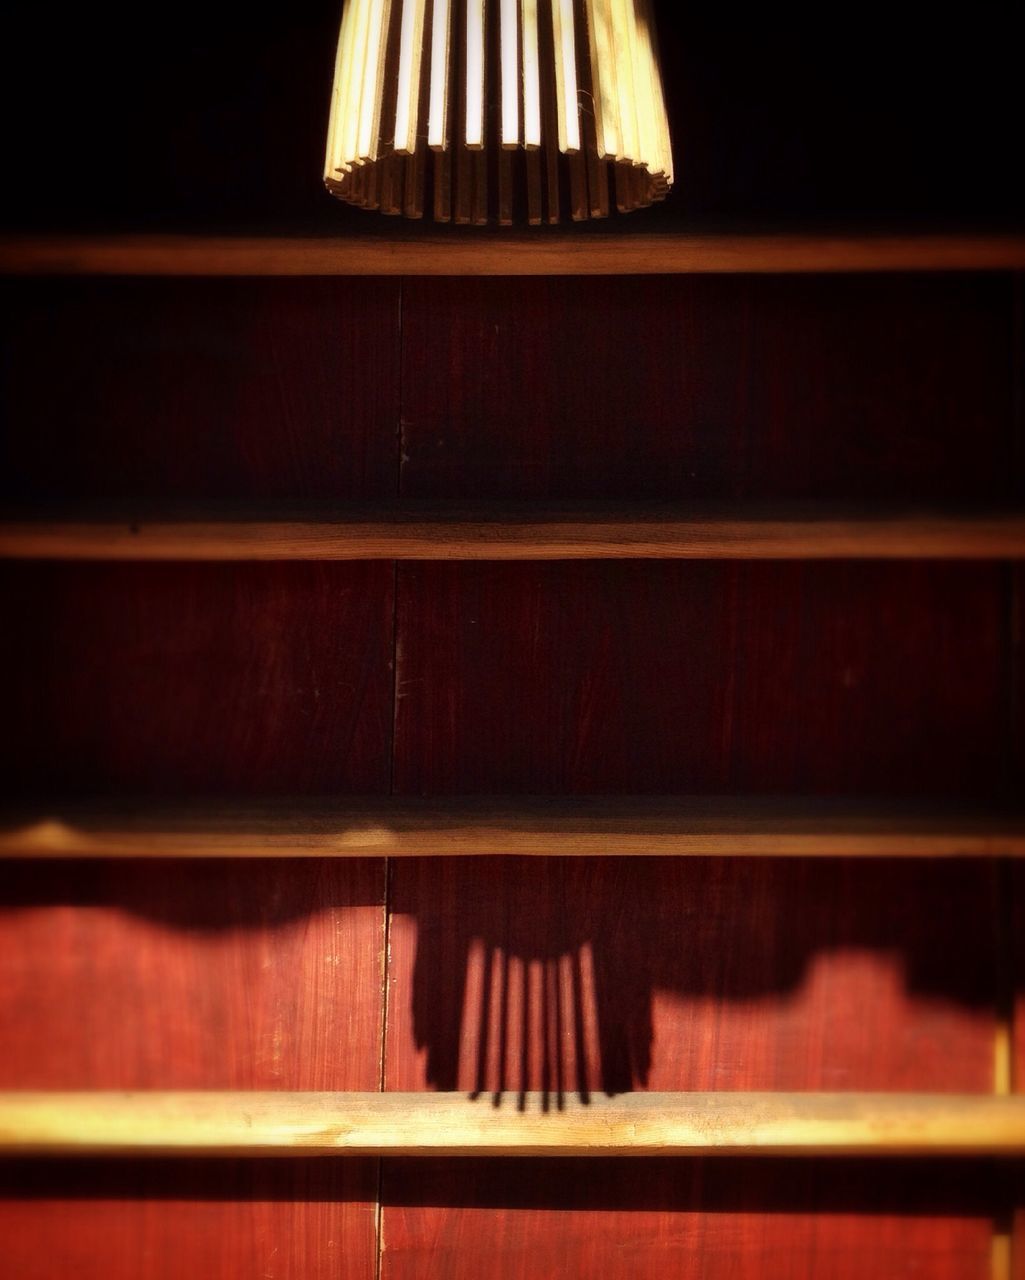 indoors, illuminated, wood - material, pattern, home interior, in a row, close-up, no people, shadow, sunlight, still life, absence, night, table, lighting equipment, wall - building feature, red, hanging, focus on foreground, dark